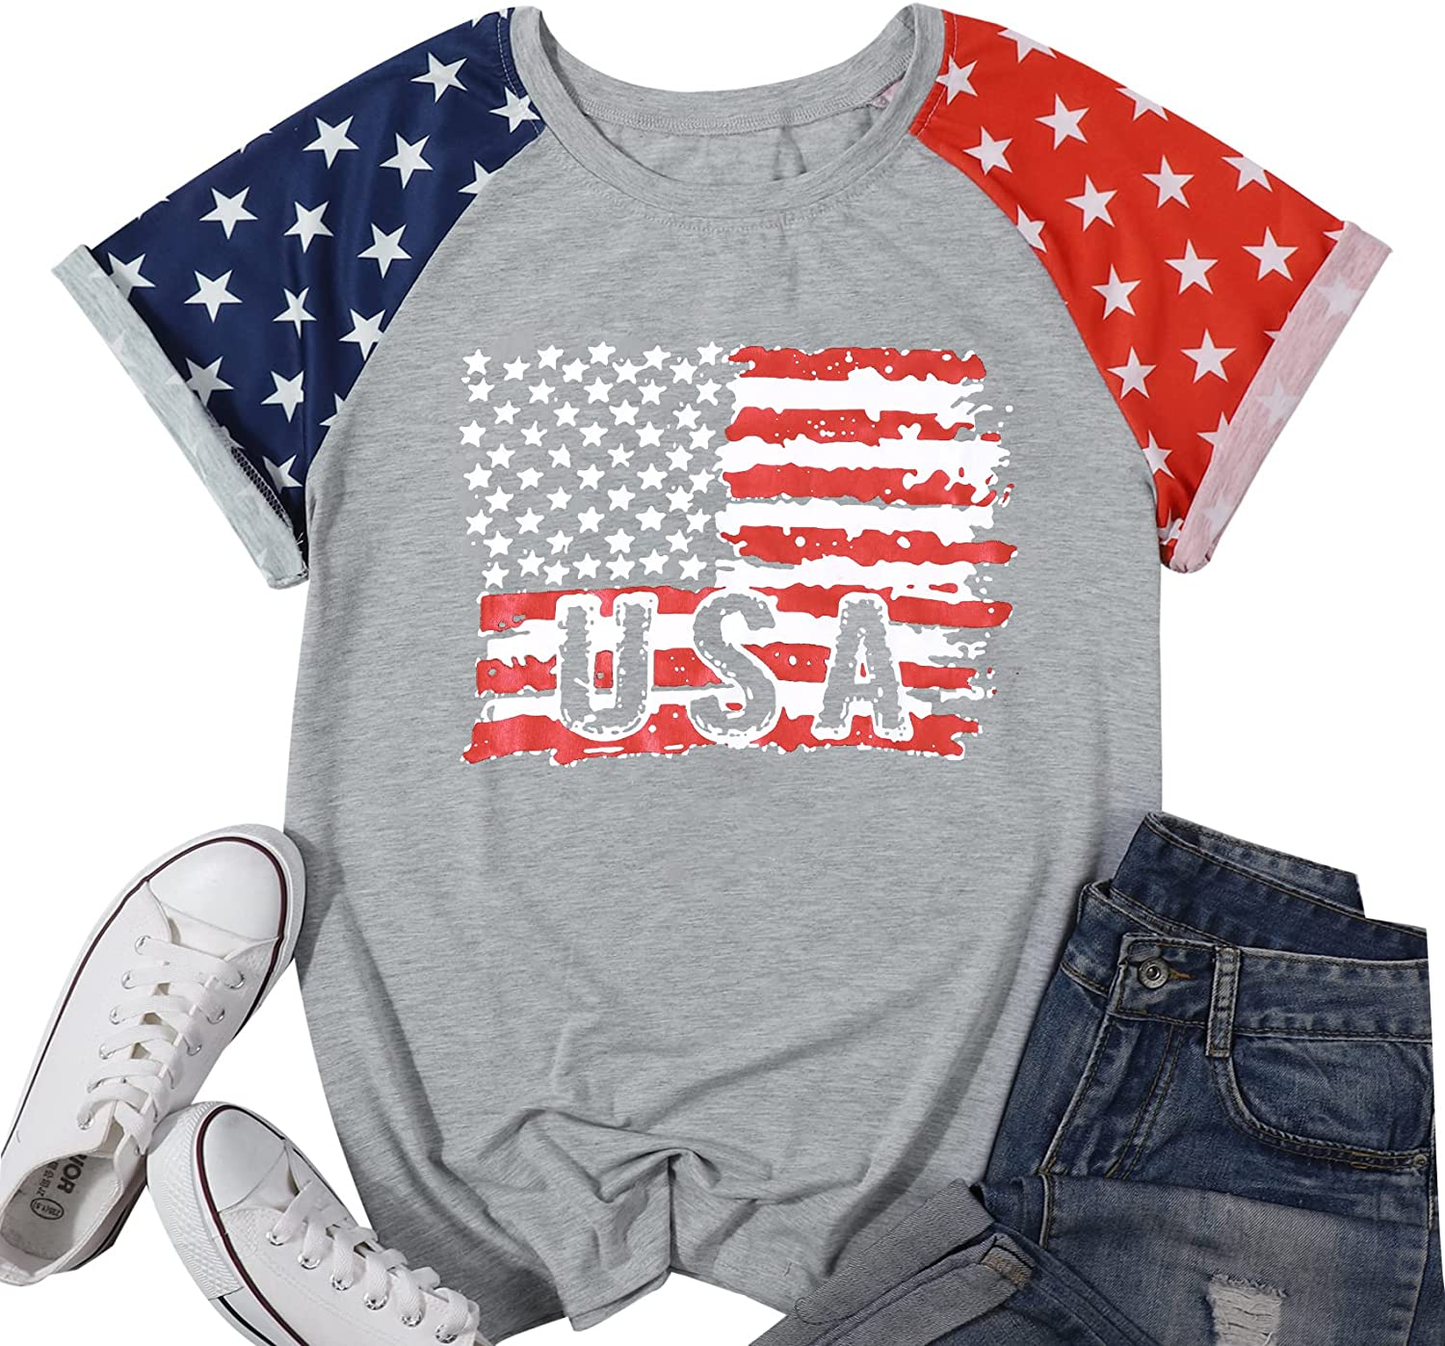 Women American Flag Shirt USA 4Th of July Independence Day T-Shirt Patriotic Stars Stripes Short Sleeve Tee Tops